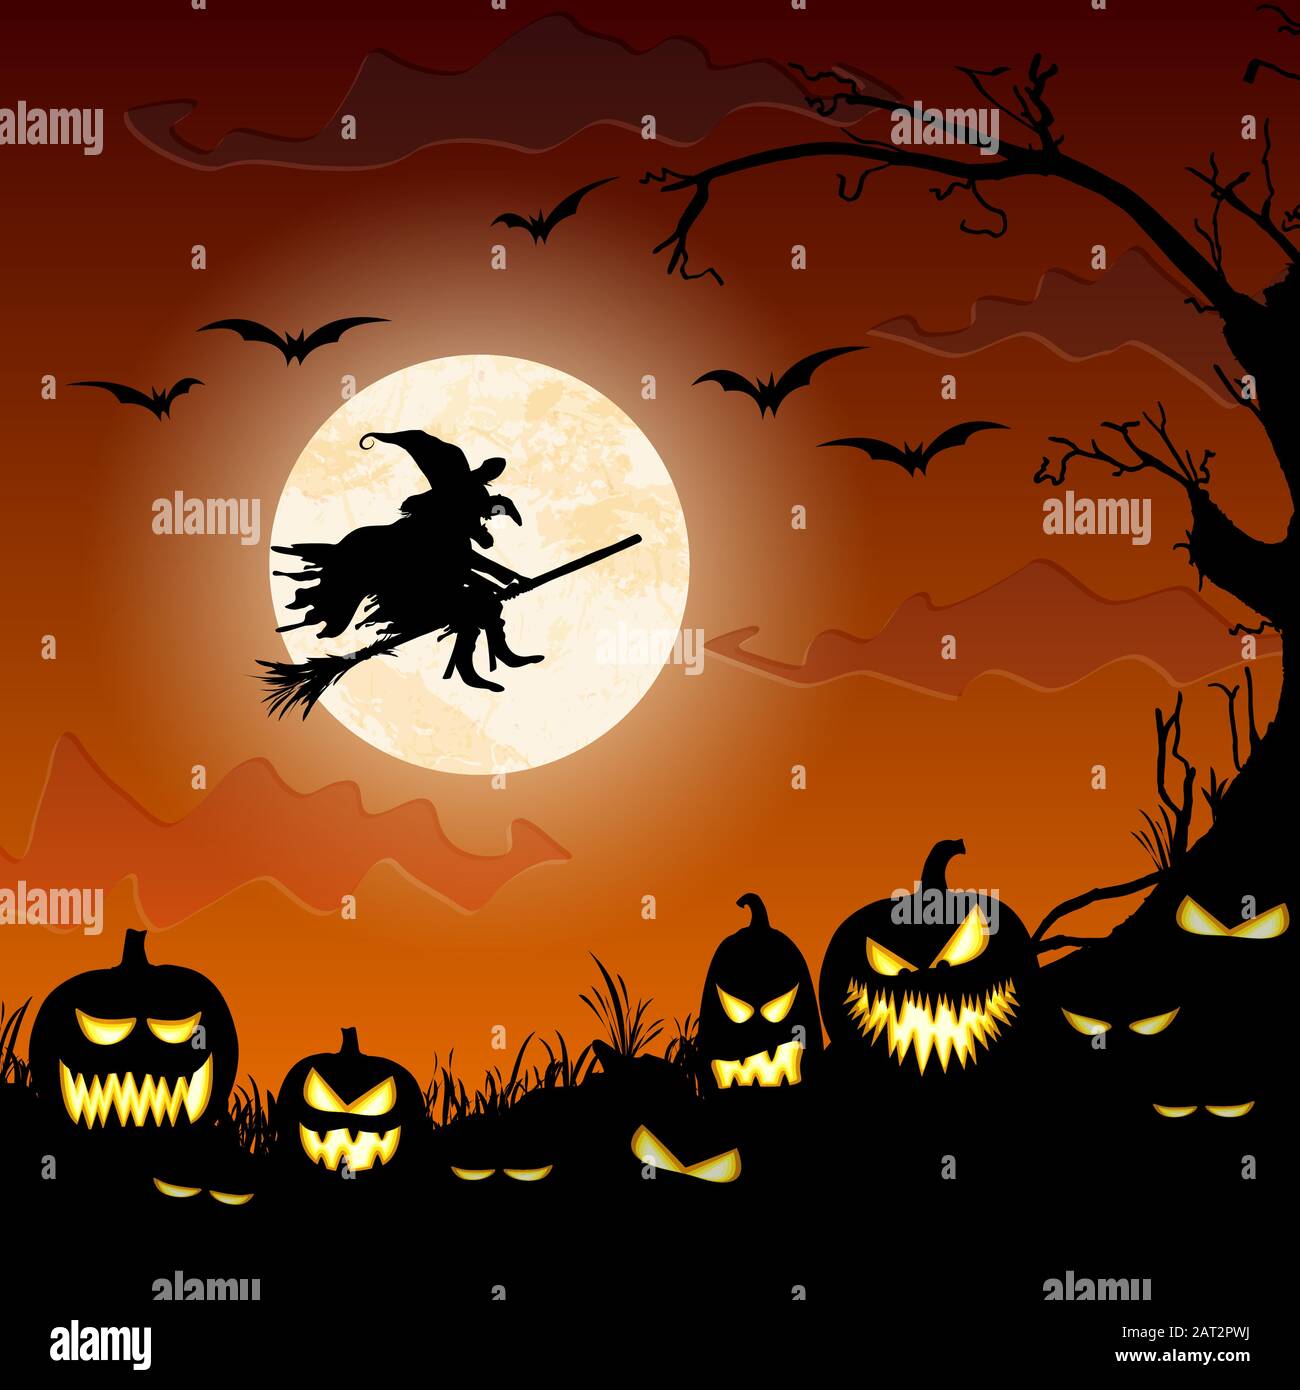 witch in front of full moon with scary illustrated elements for ...